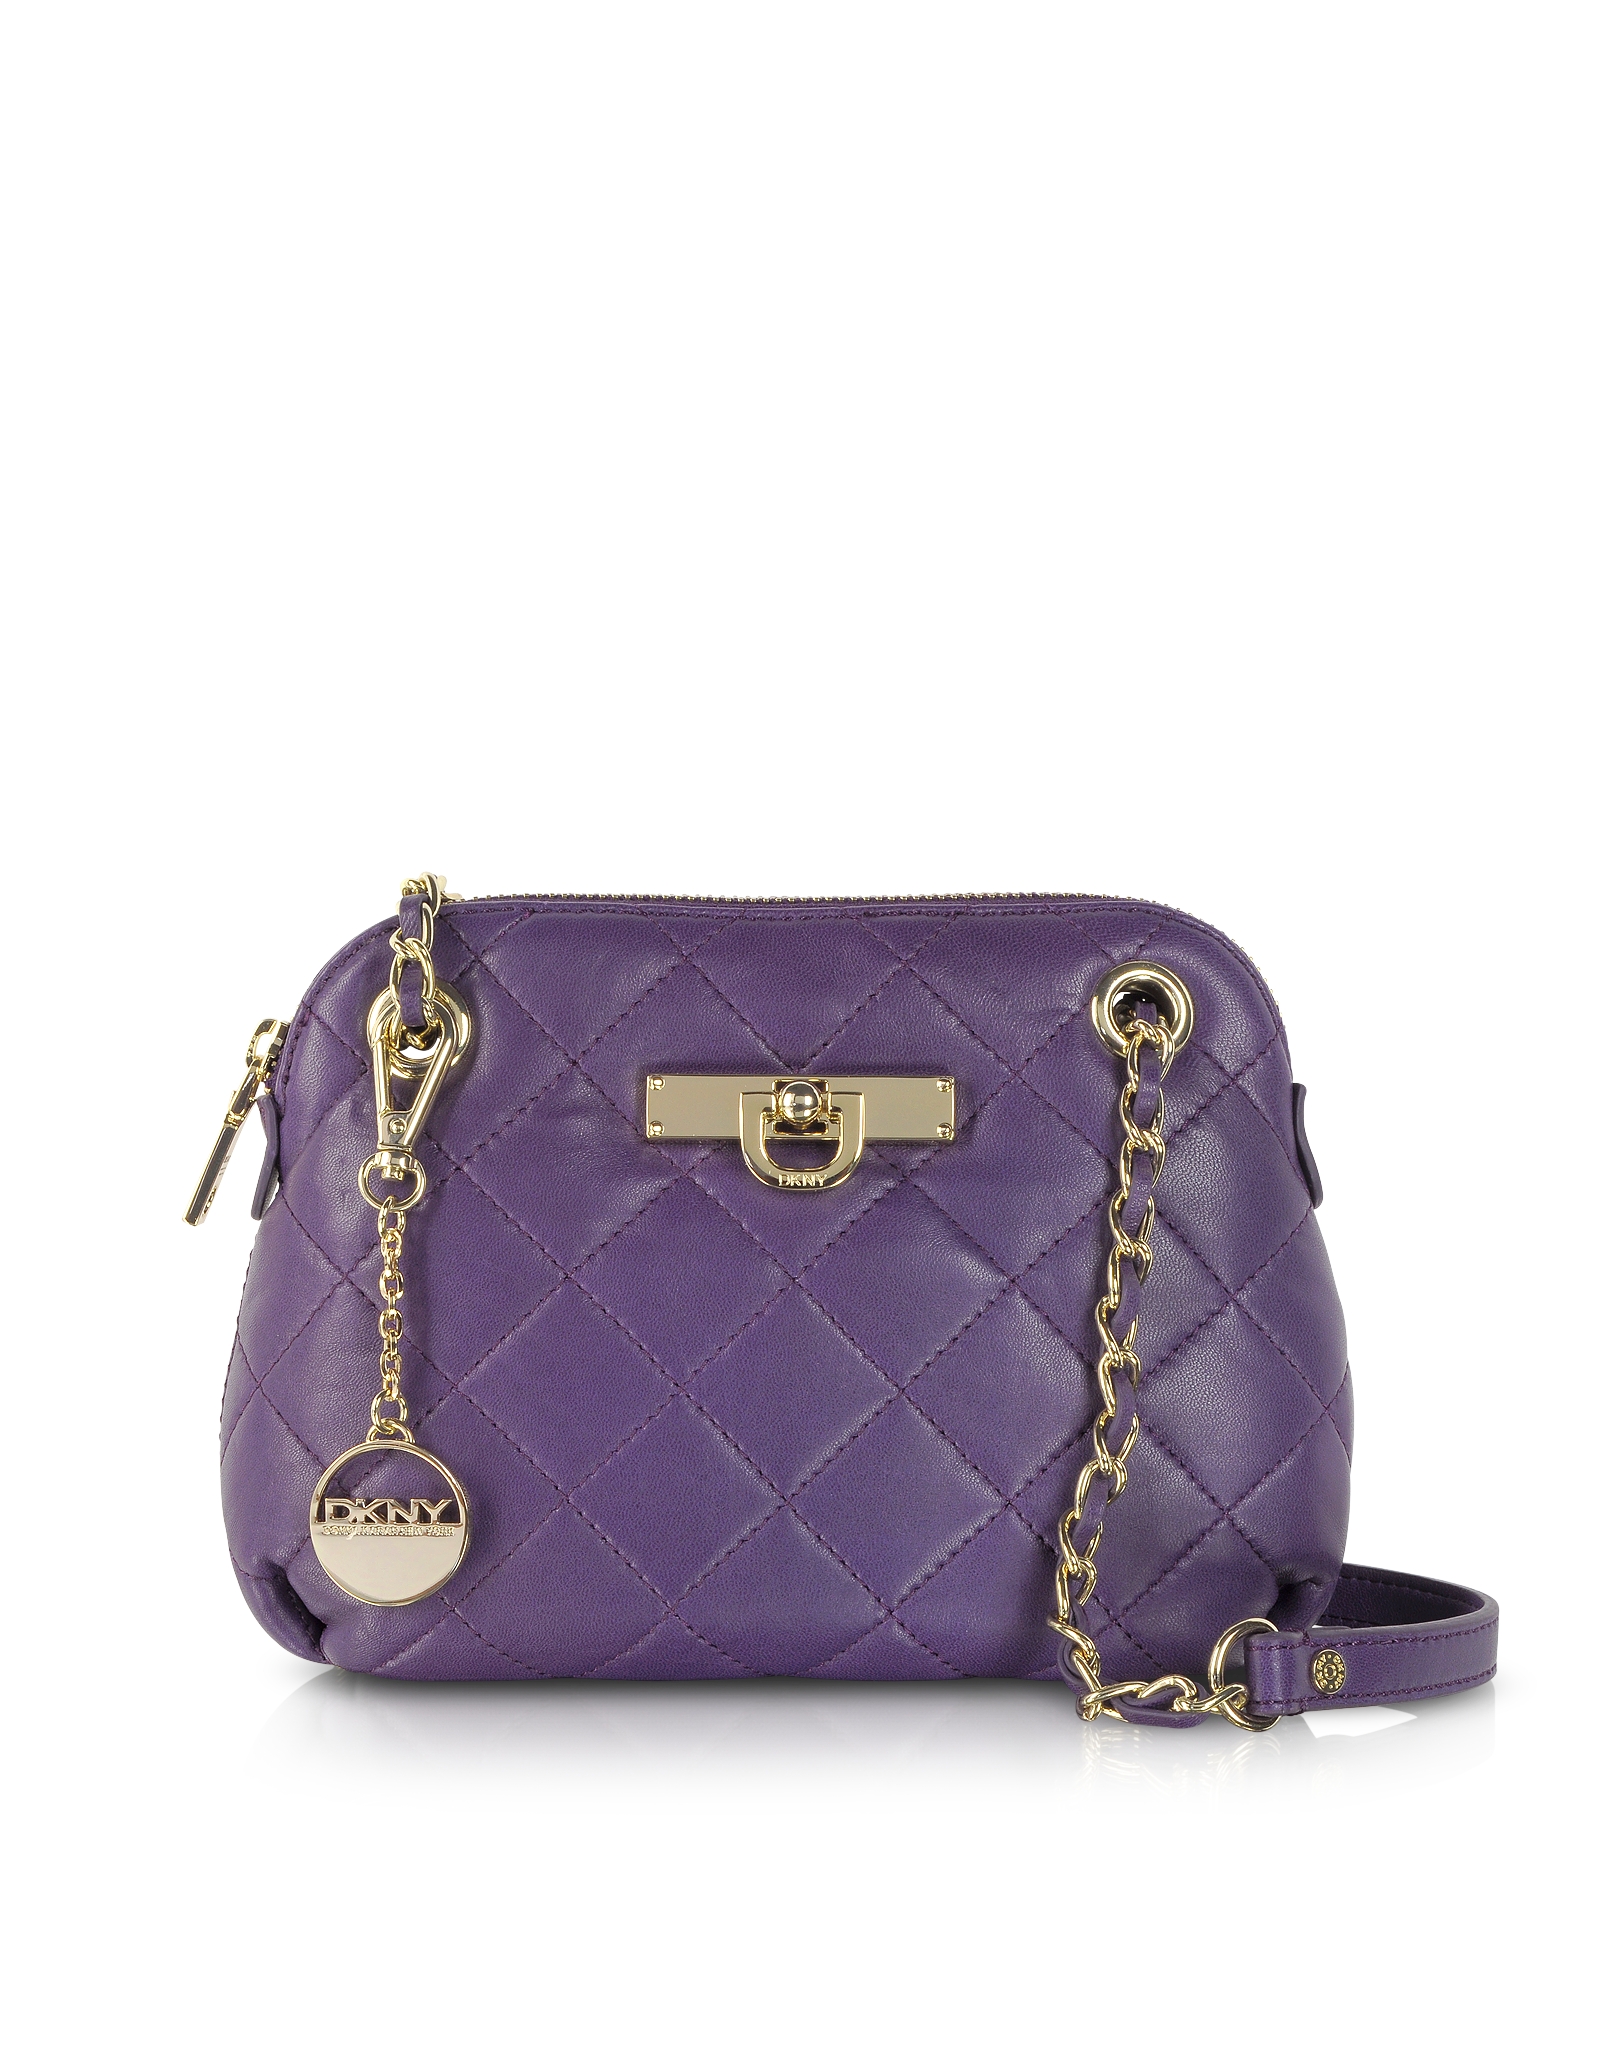 Dkny Small Round Quilted Leather Crossbody Bag in Purple | Lyst